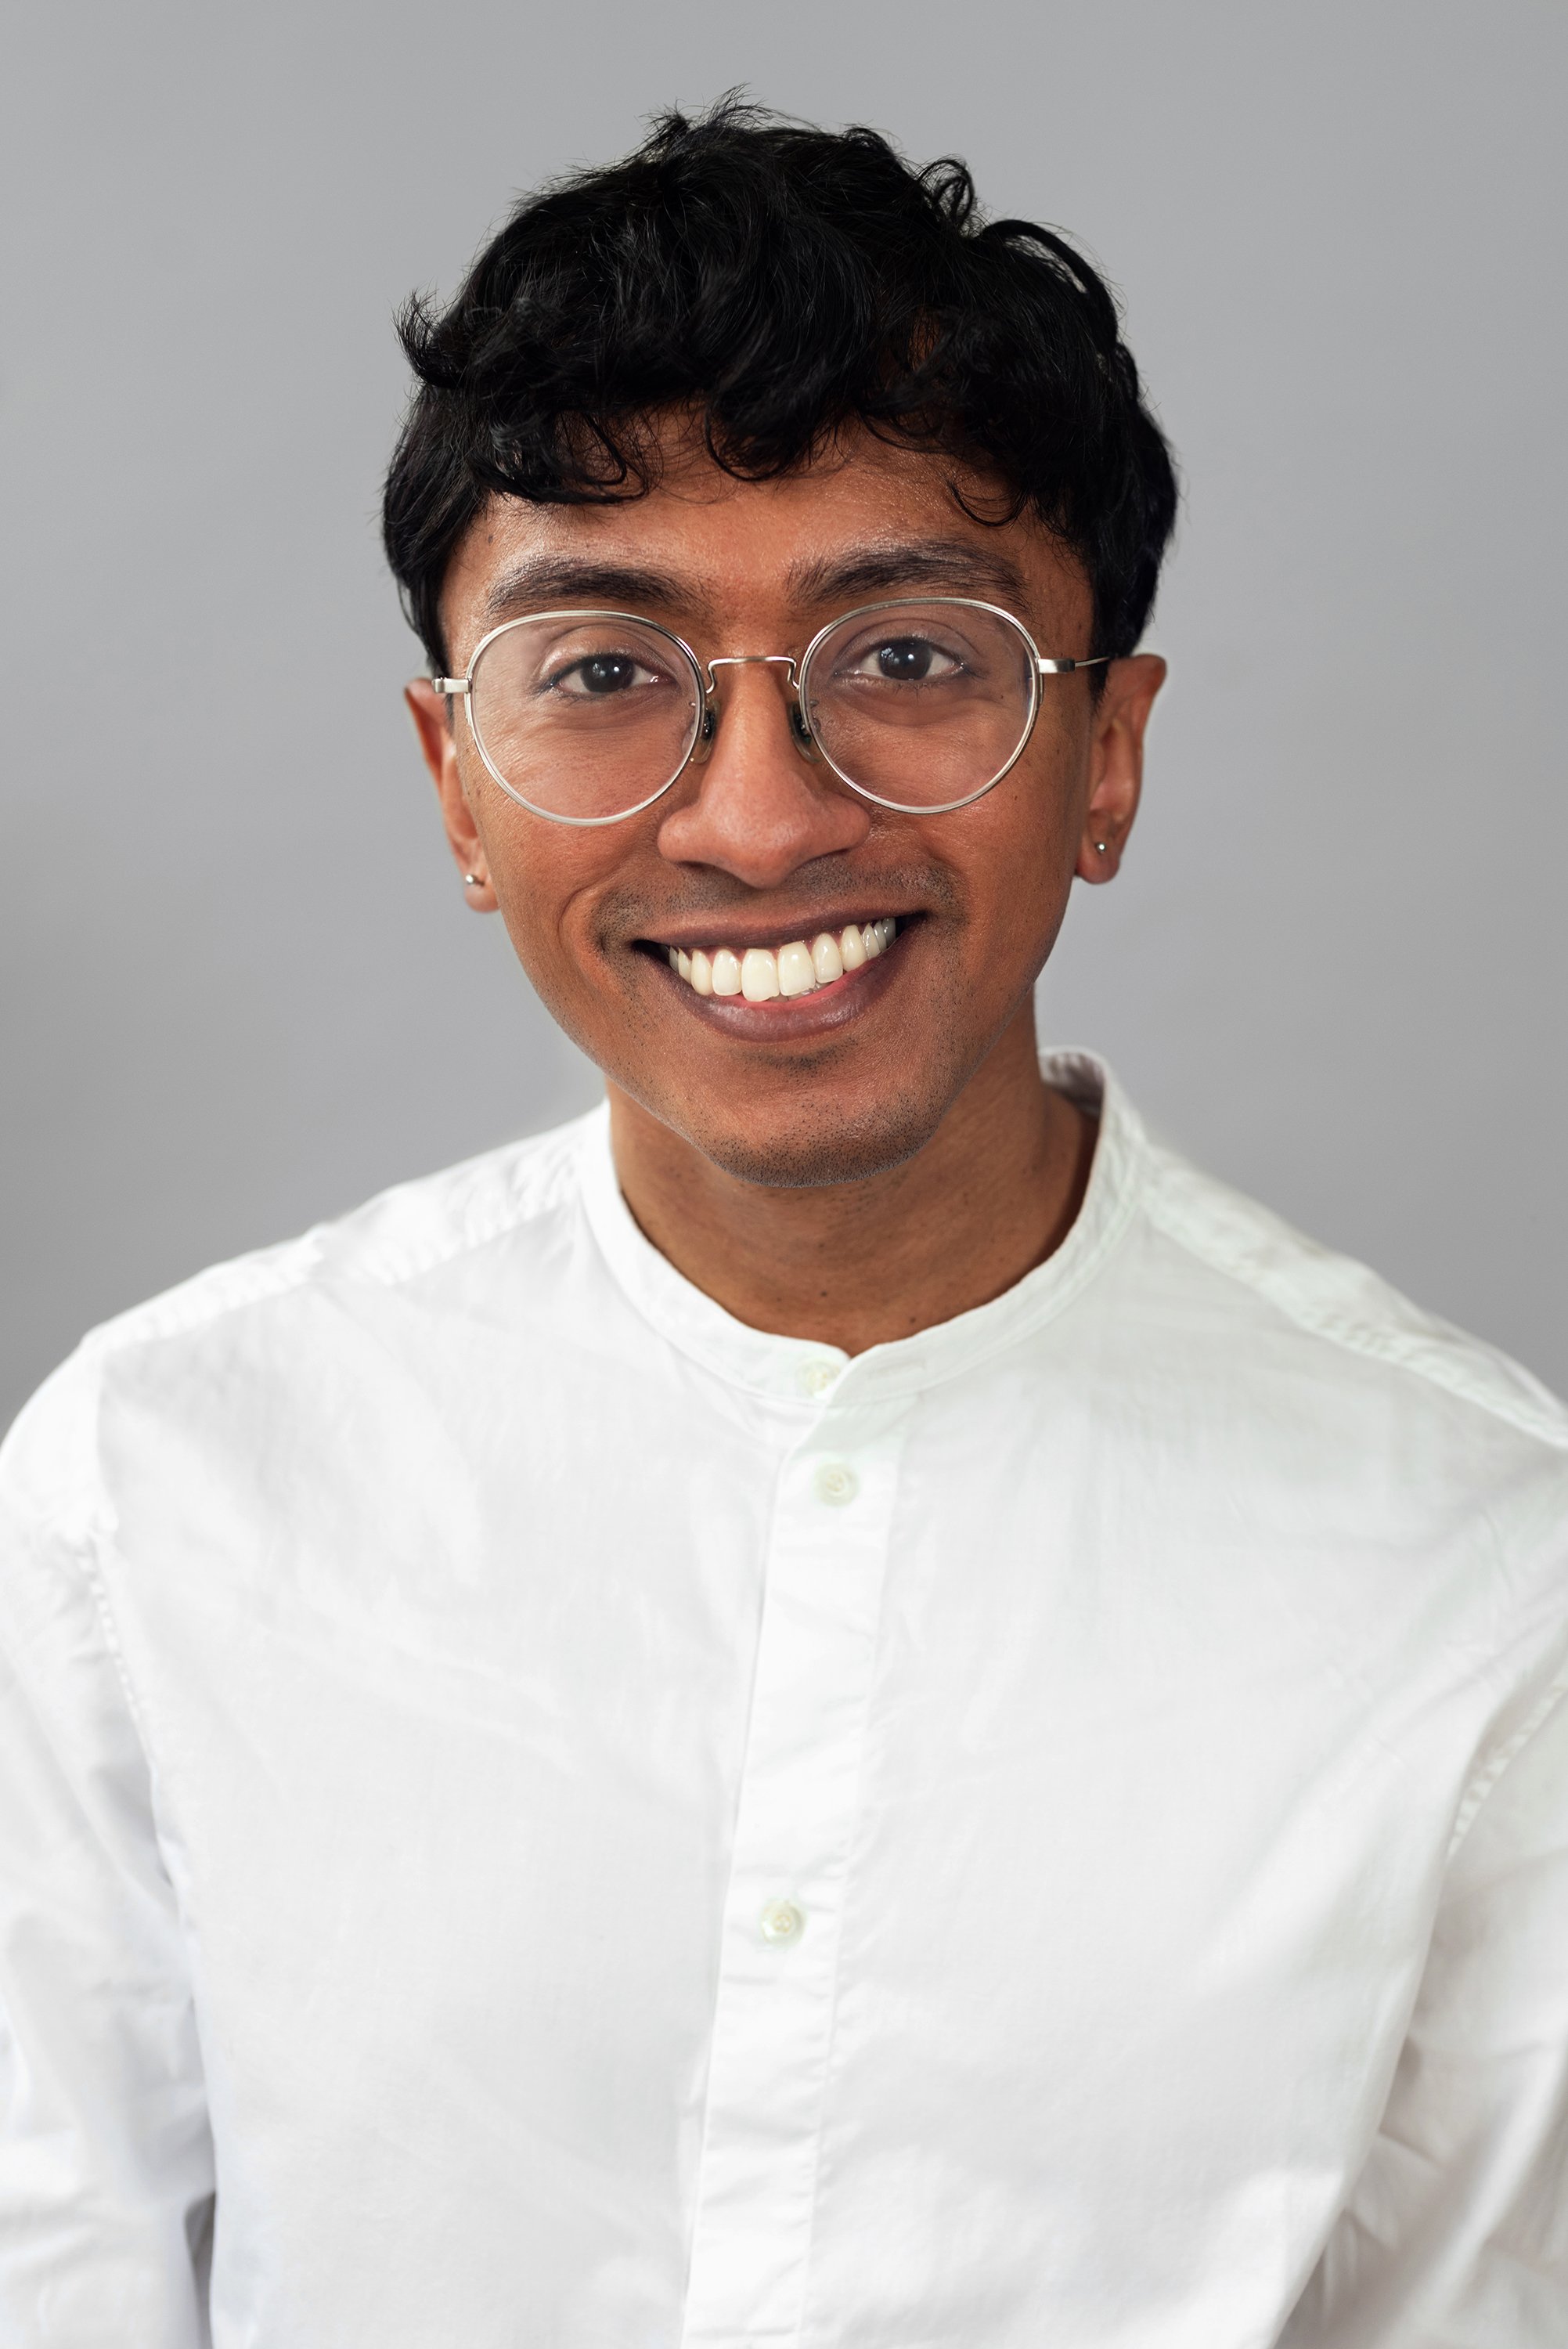  Corporate headshot of man in a white buttoned top and glasses by Ari Scott, NYC headshot photographer. 